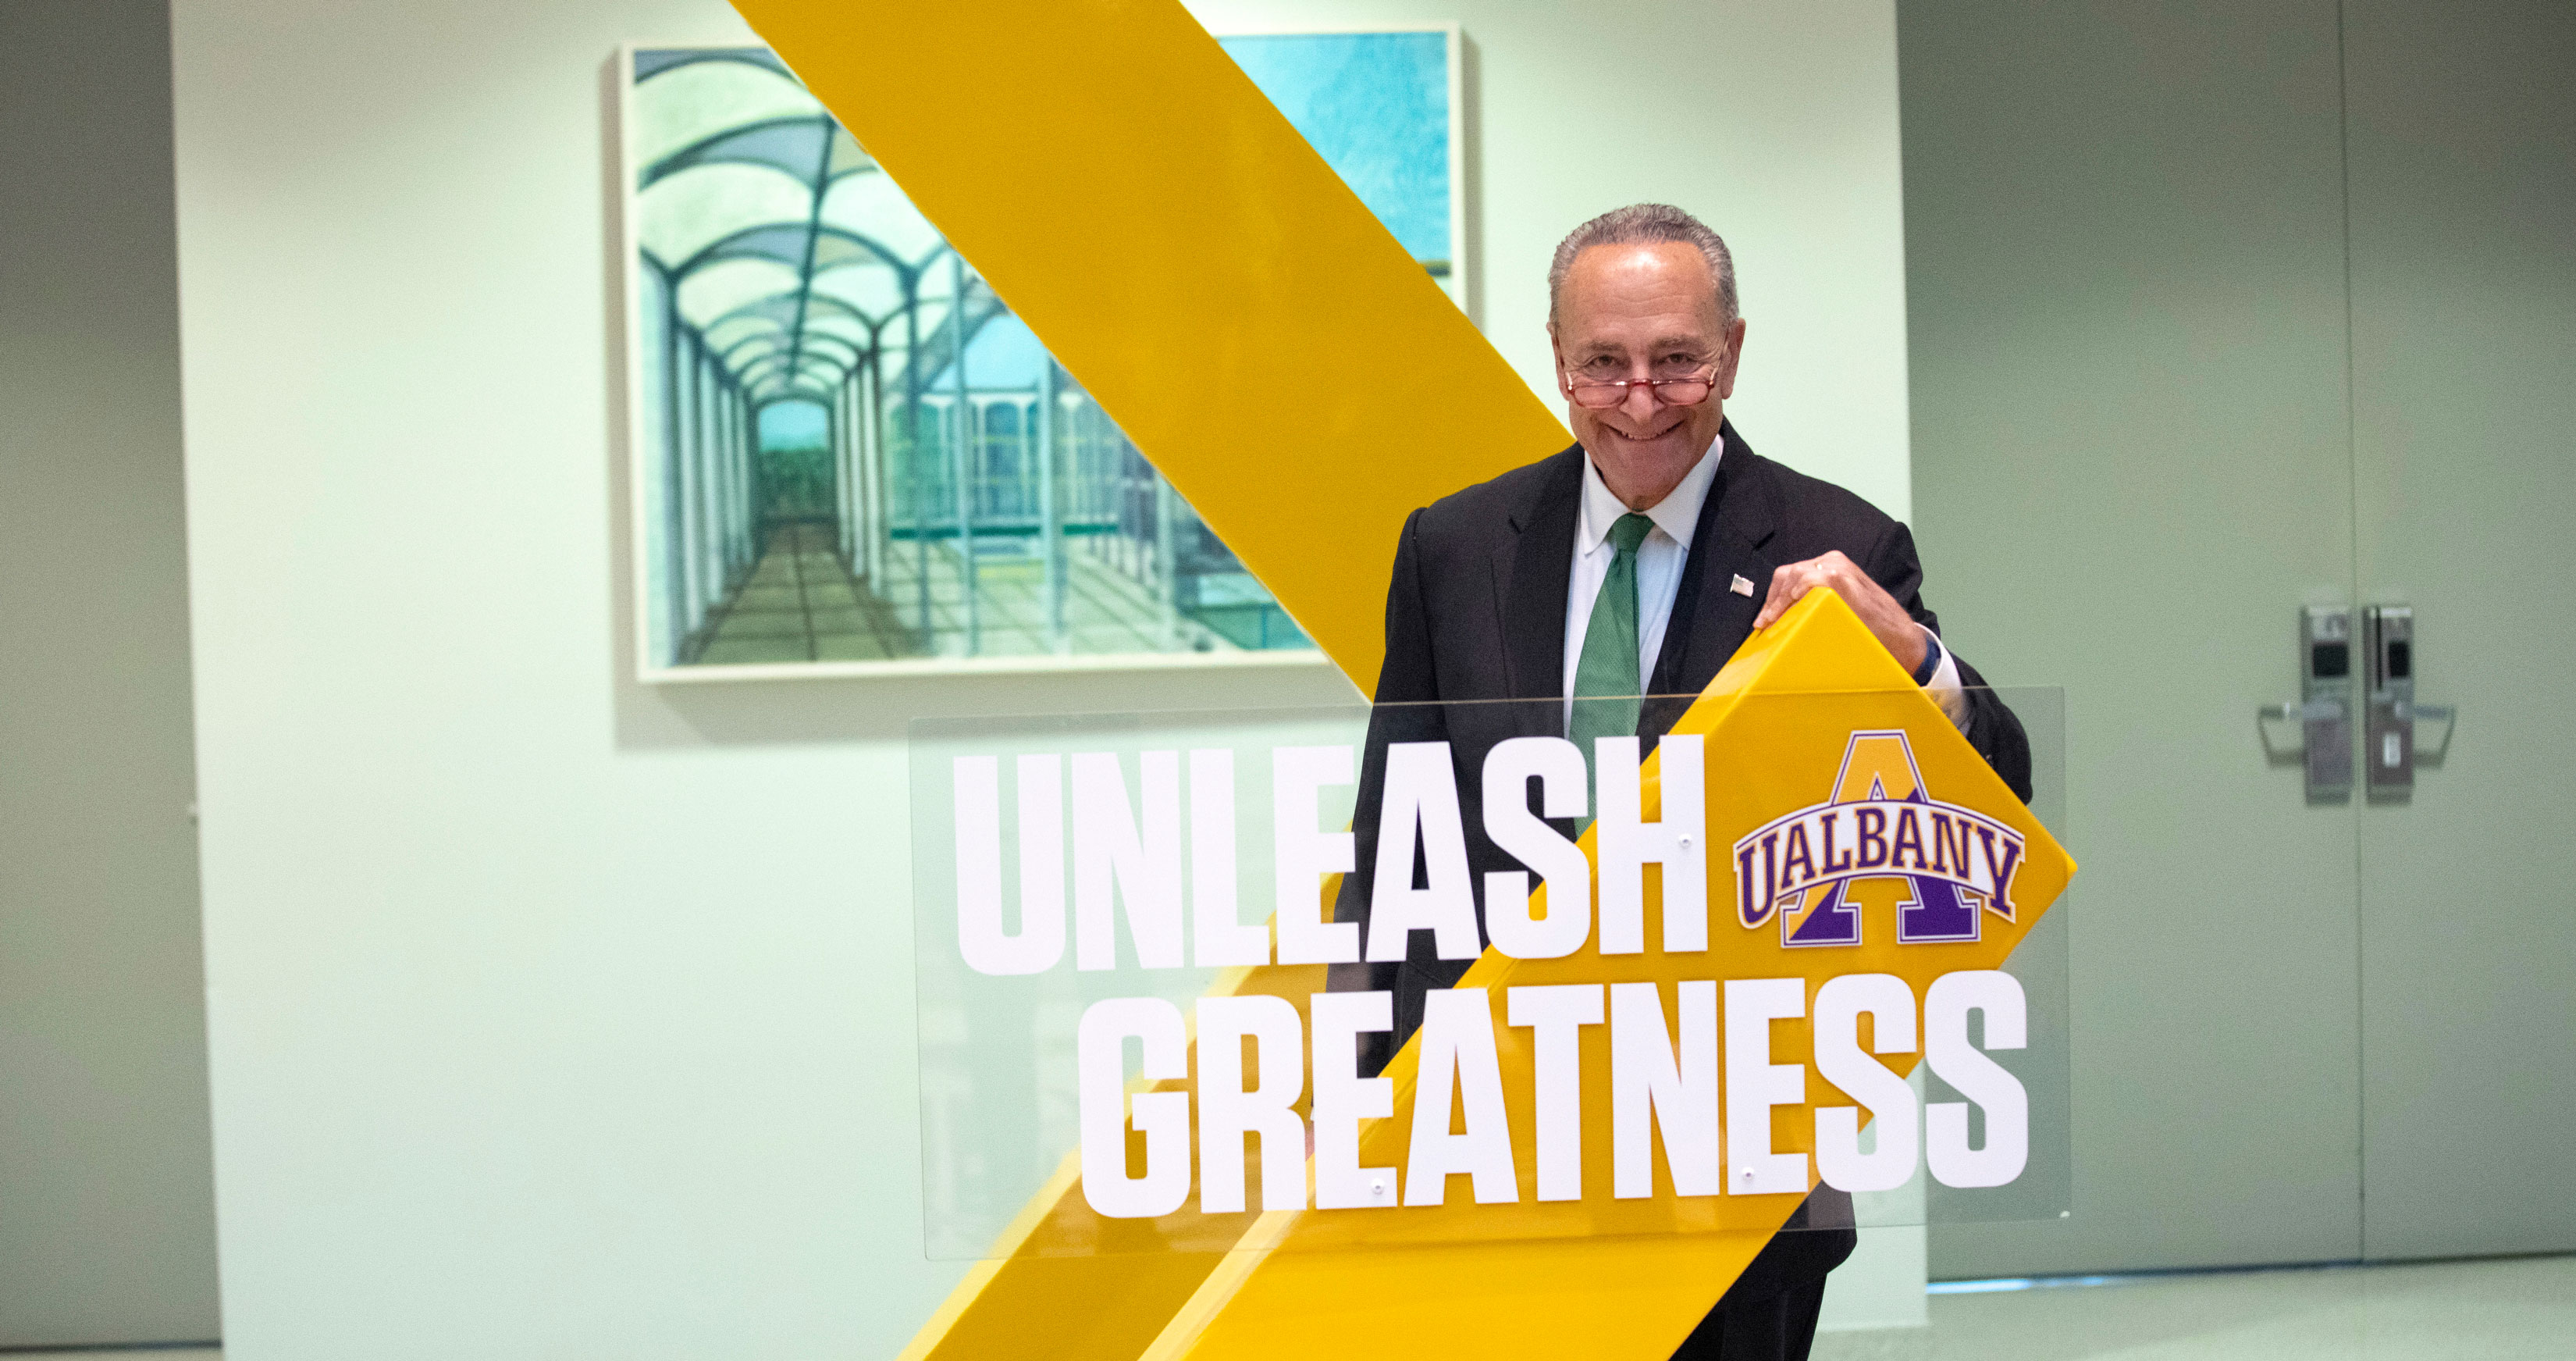 U.S. Senator Charles E. Schumer poses with an Unleash Greatness UAlbany sign.